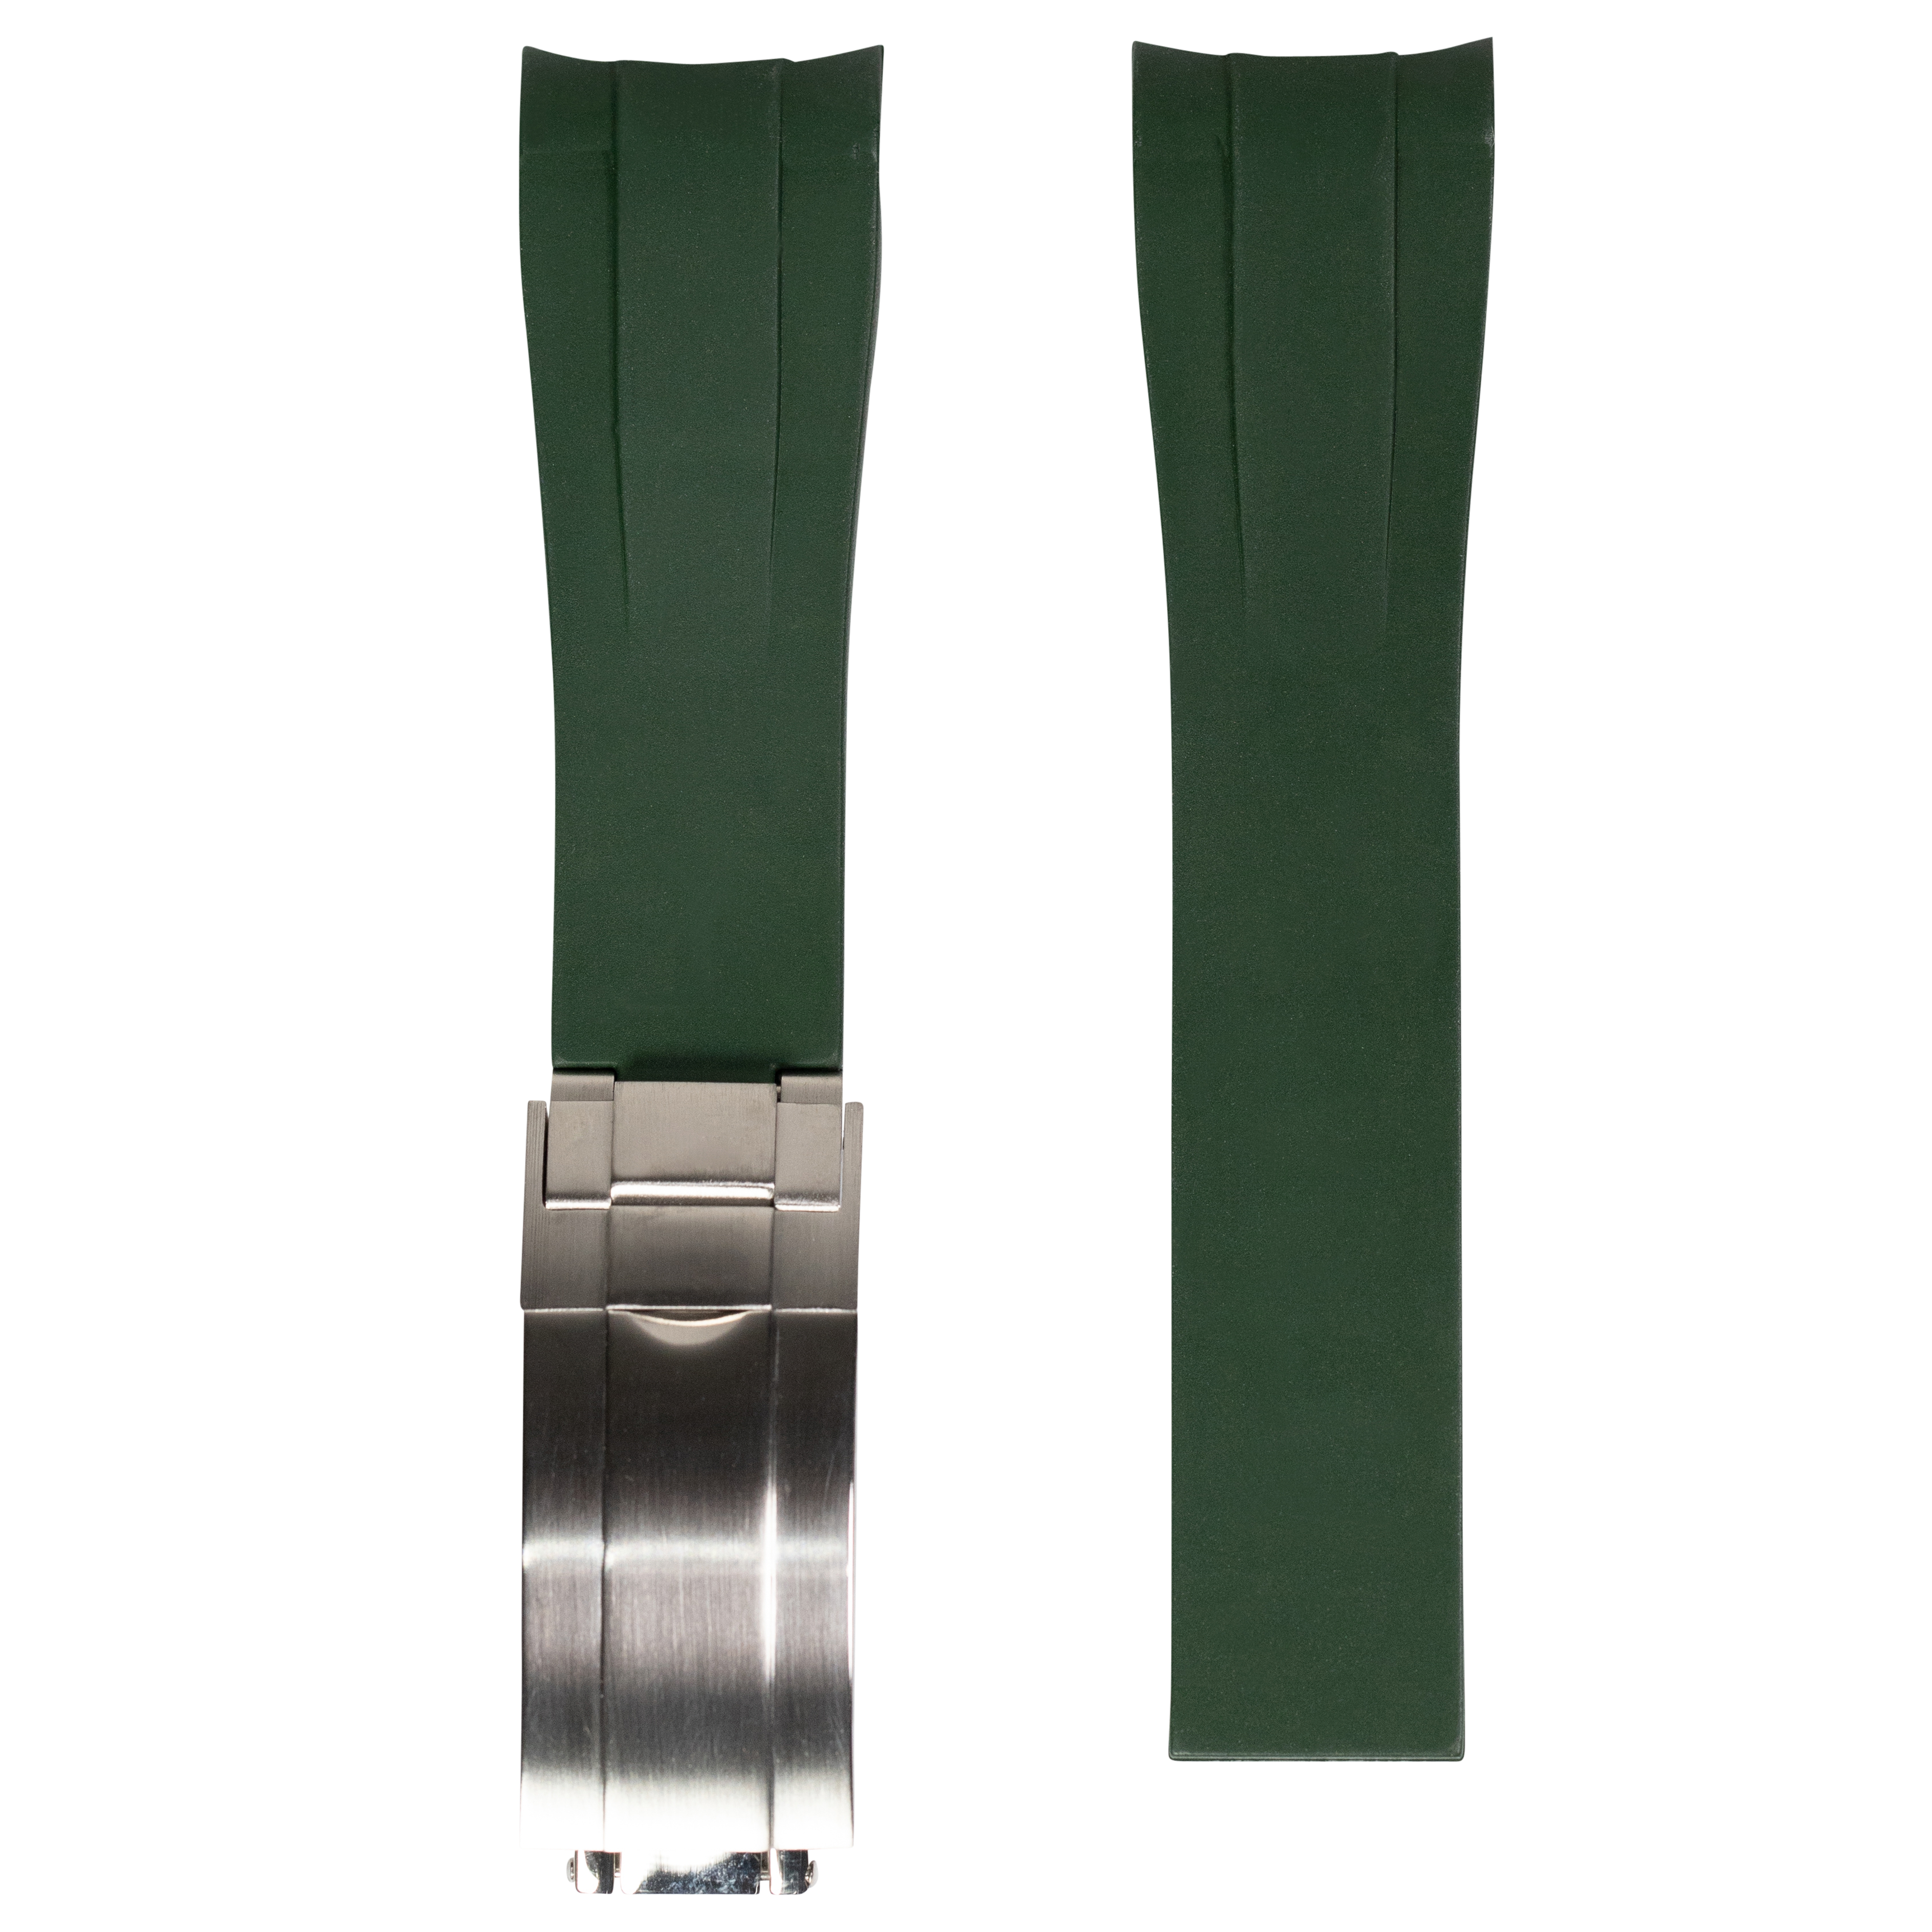 [Rolex Only] Vulcanised Rubber with Oyster Clasp  - Forest Green